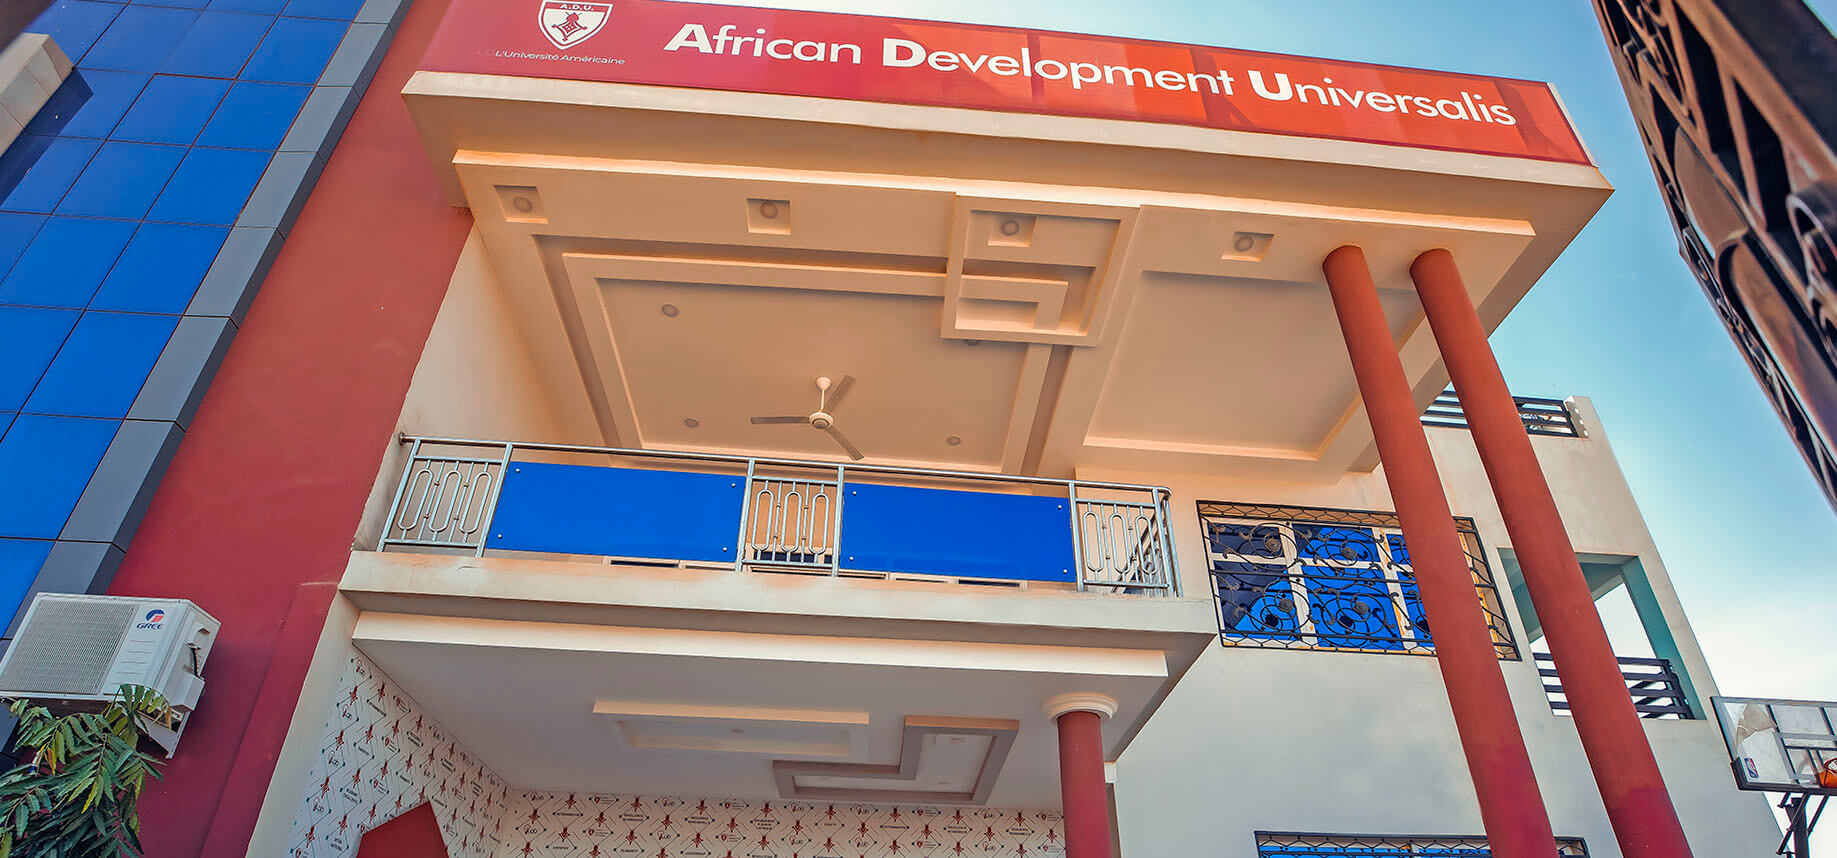 Mastercard Foundation withholds funding for African Development University over serious allegations against its leadership